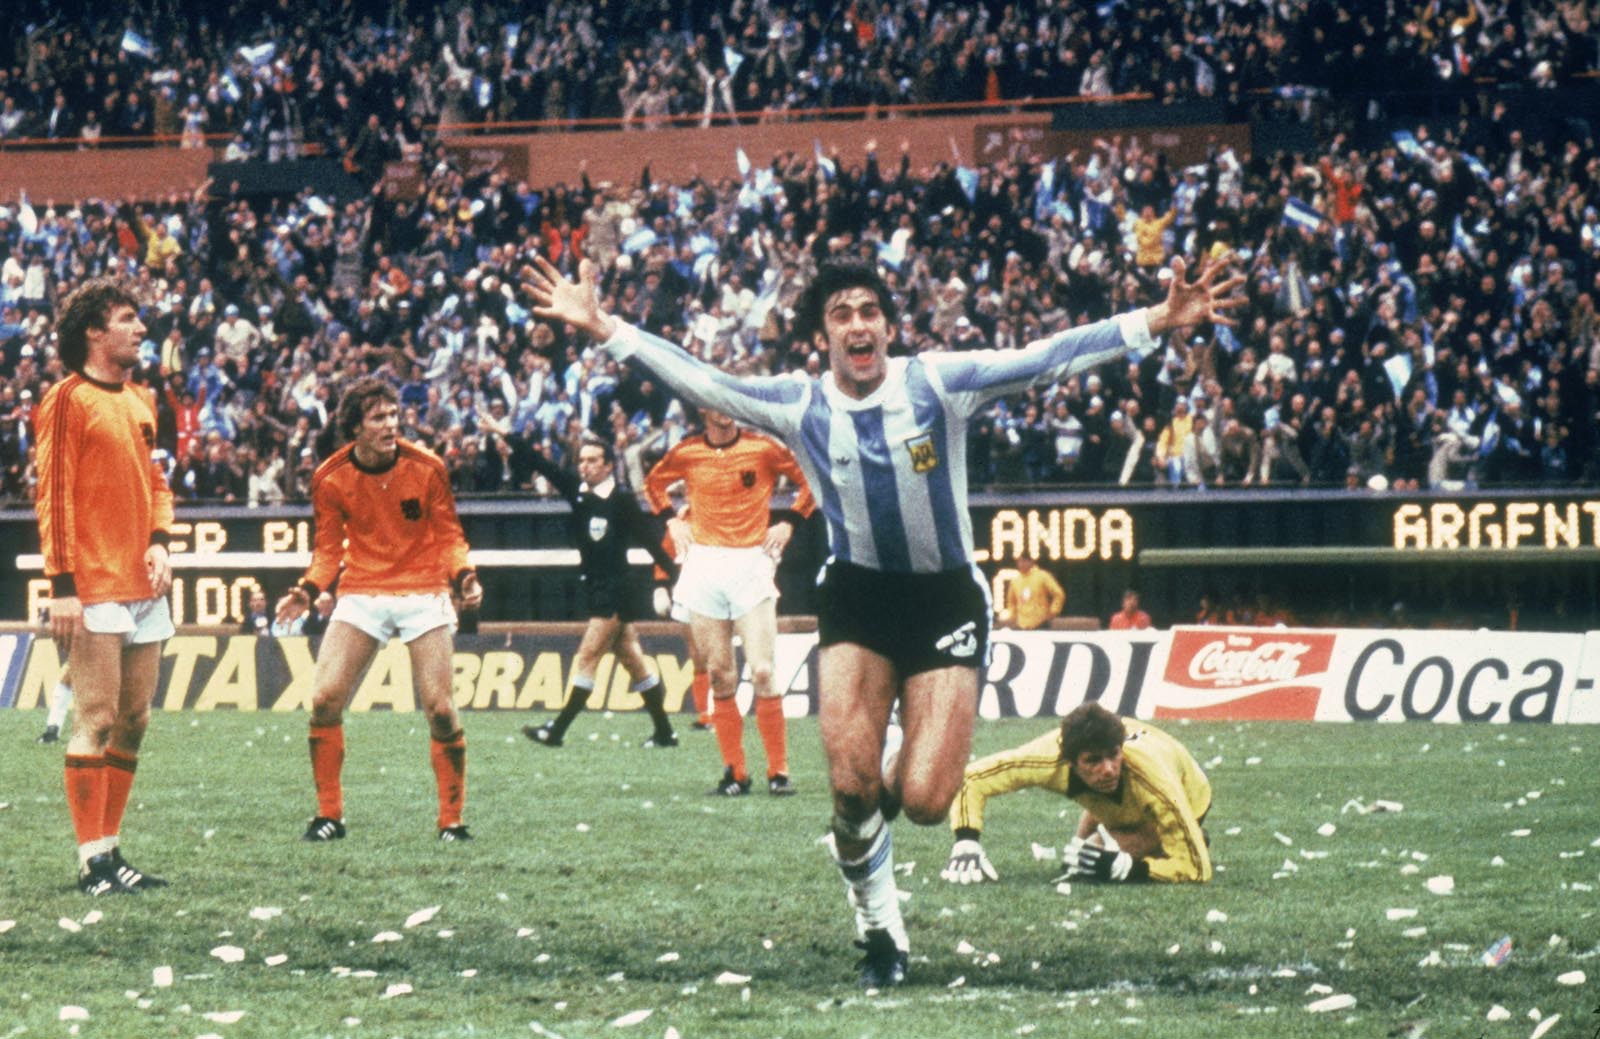 Argentina's Mario Kempes scores in the 1978 FIFA World Cup Final against the Netherlands